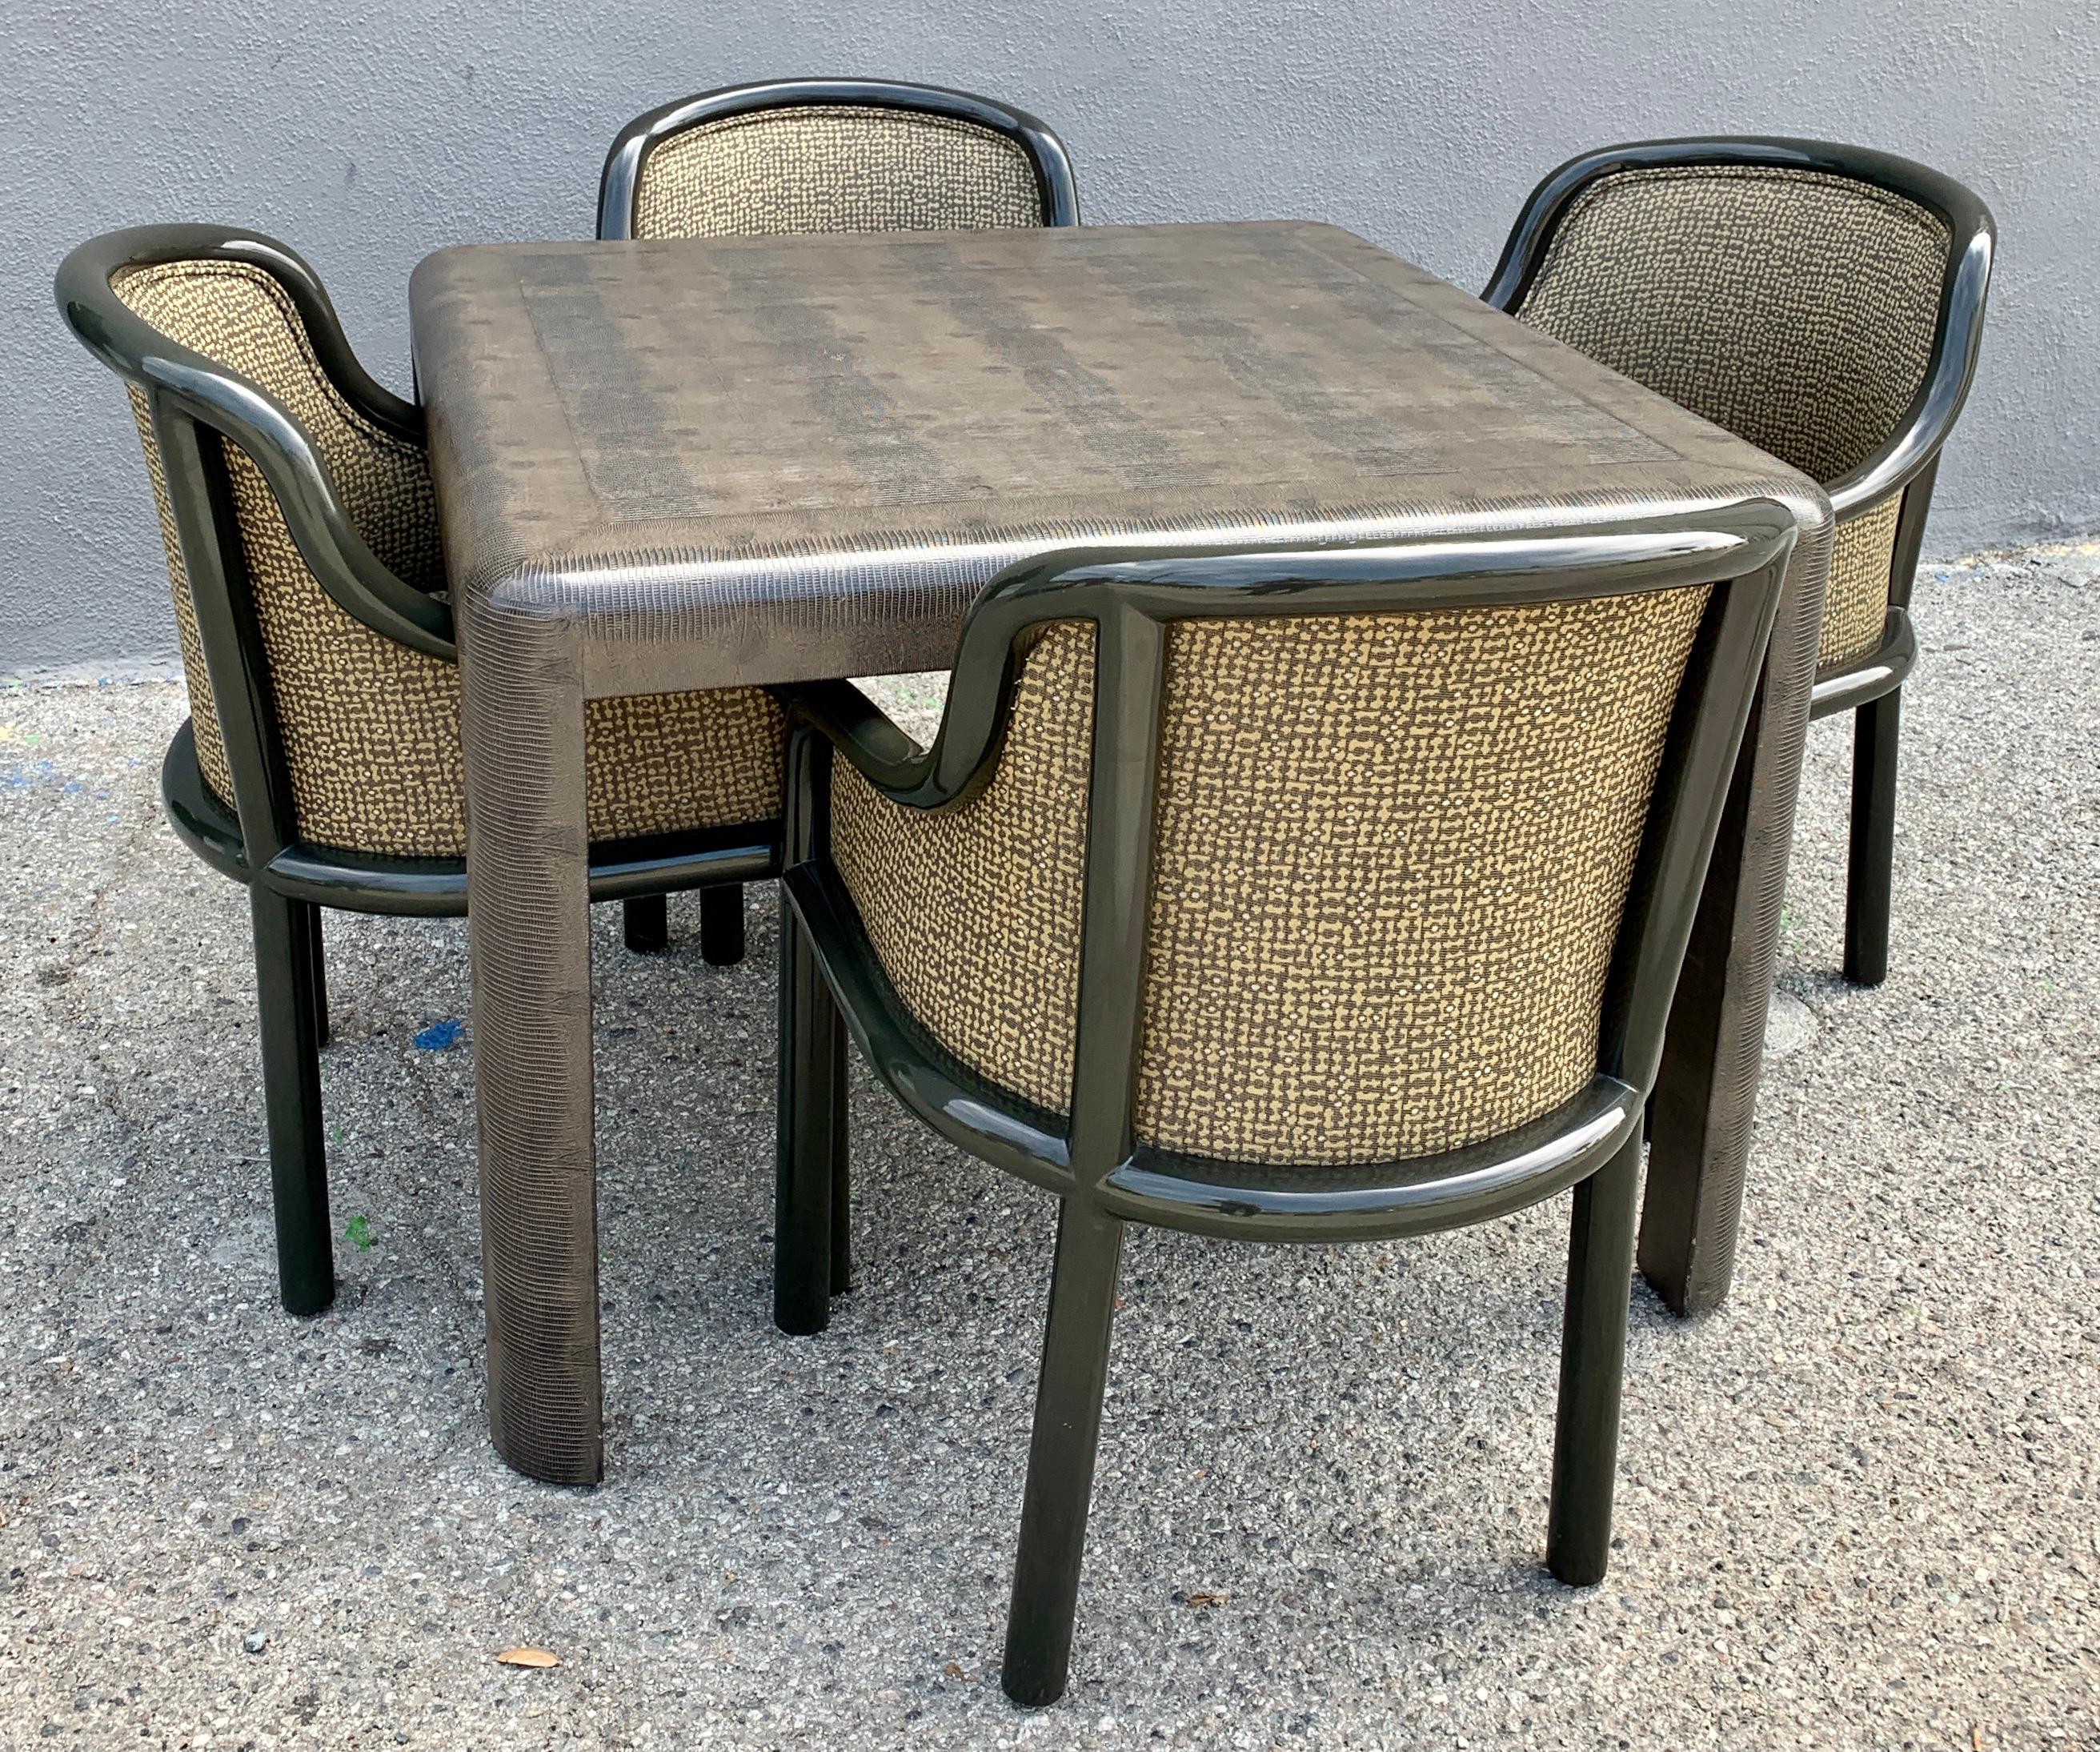 Signed Karl Springer Game or dining table. The table is leather embossed lizard, in very good vintage condition. Four lacquered chairs with very good upholstery - all coordinating in color and style. We can also reupholster with COM if working with